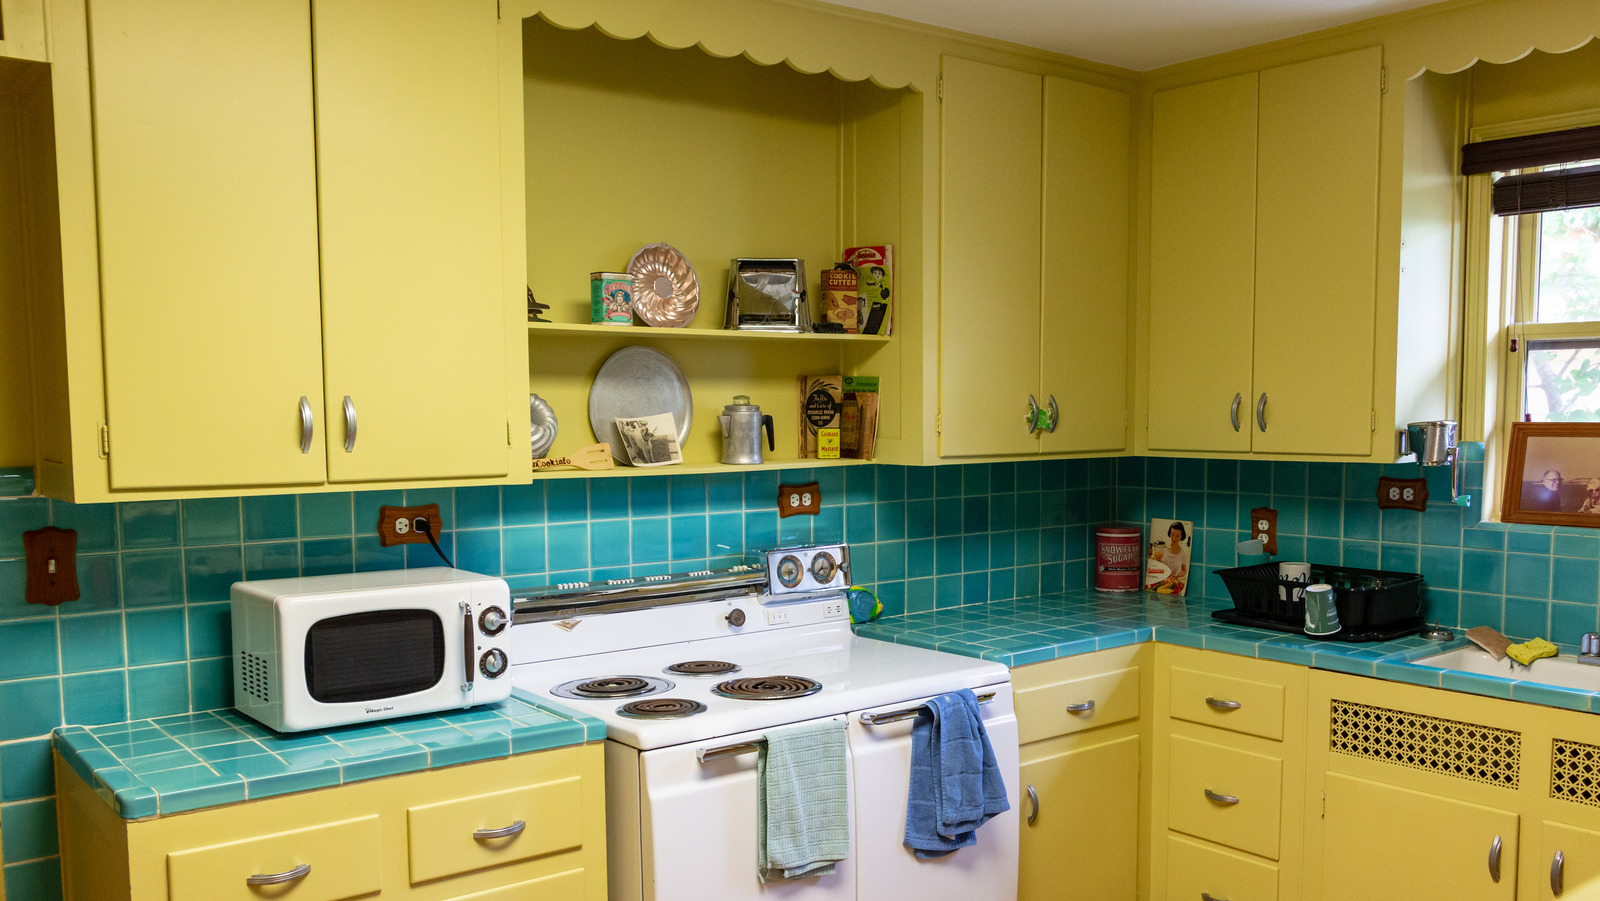 https://www.housedigest.com/img/gallery/how-to-create-a-retro-style-kitchen/l-intro-1659394852.jpg